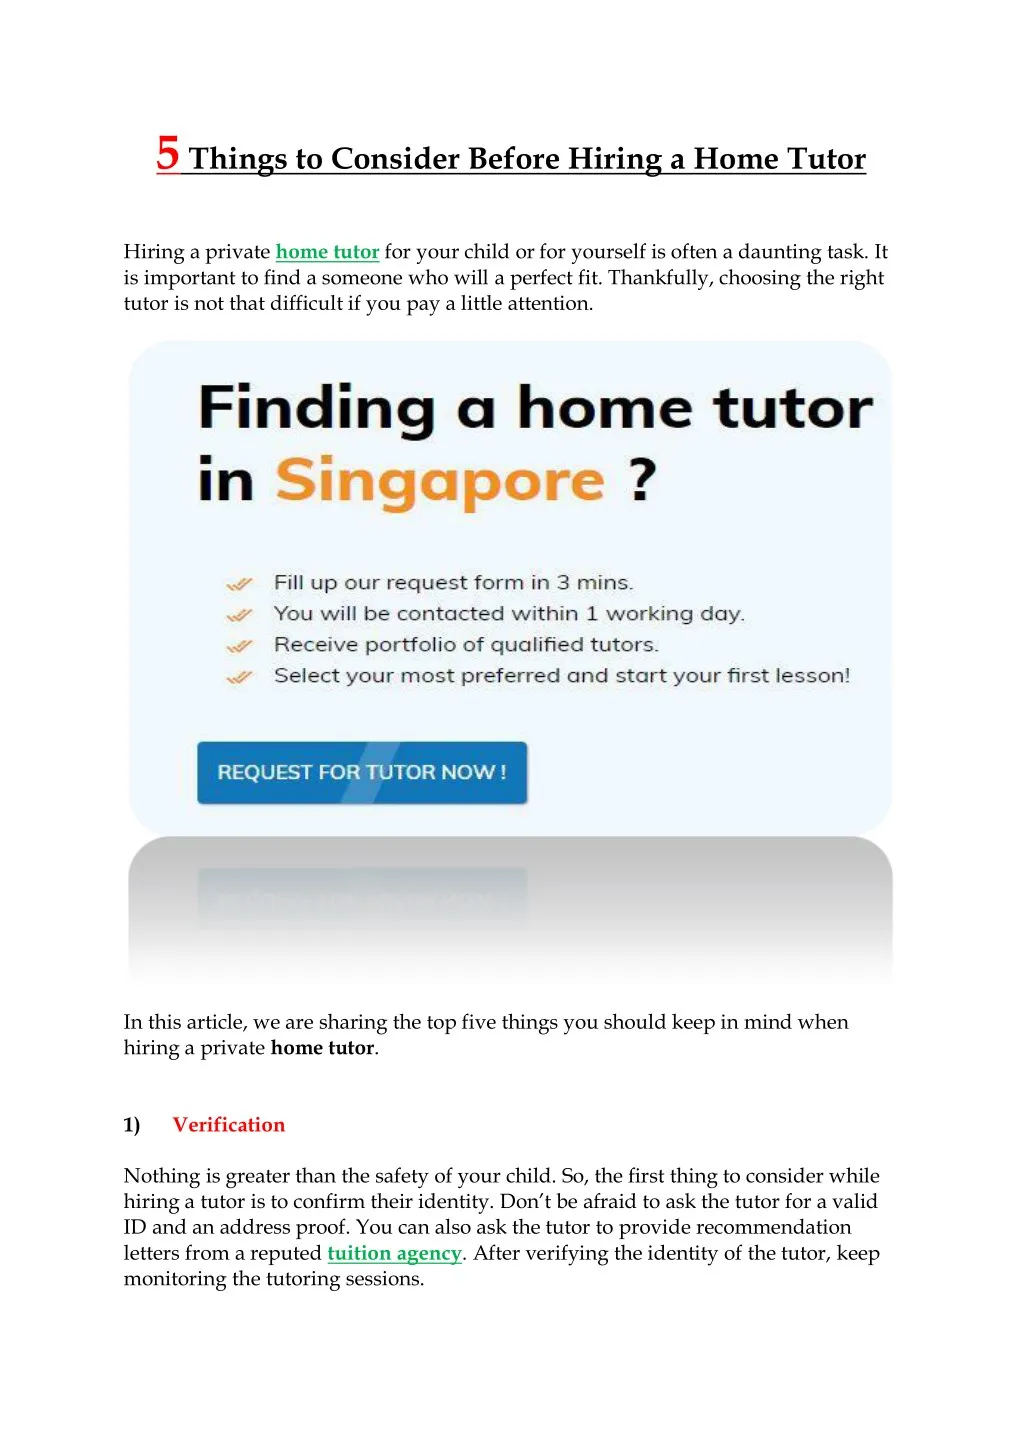 5 things to consider before hiring a home tutor